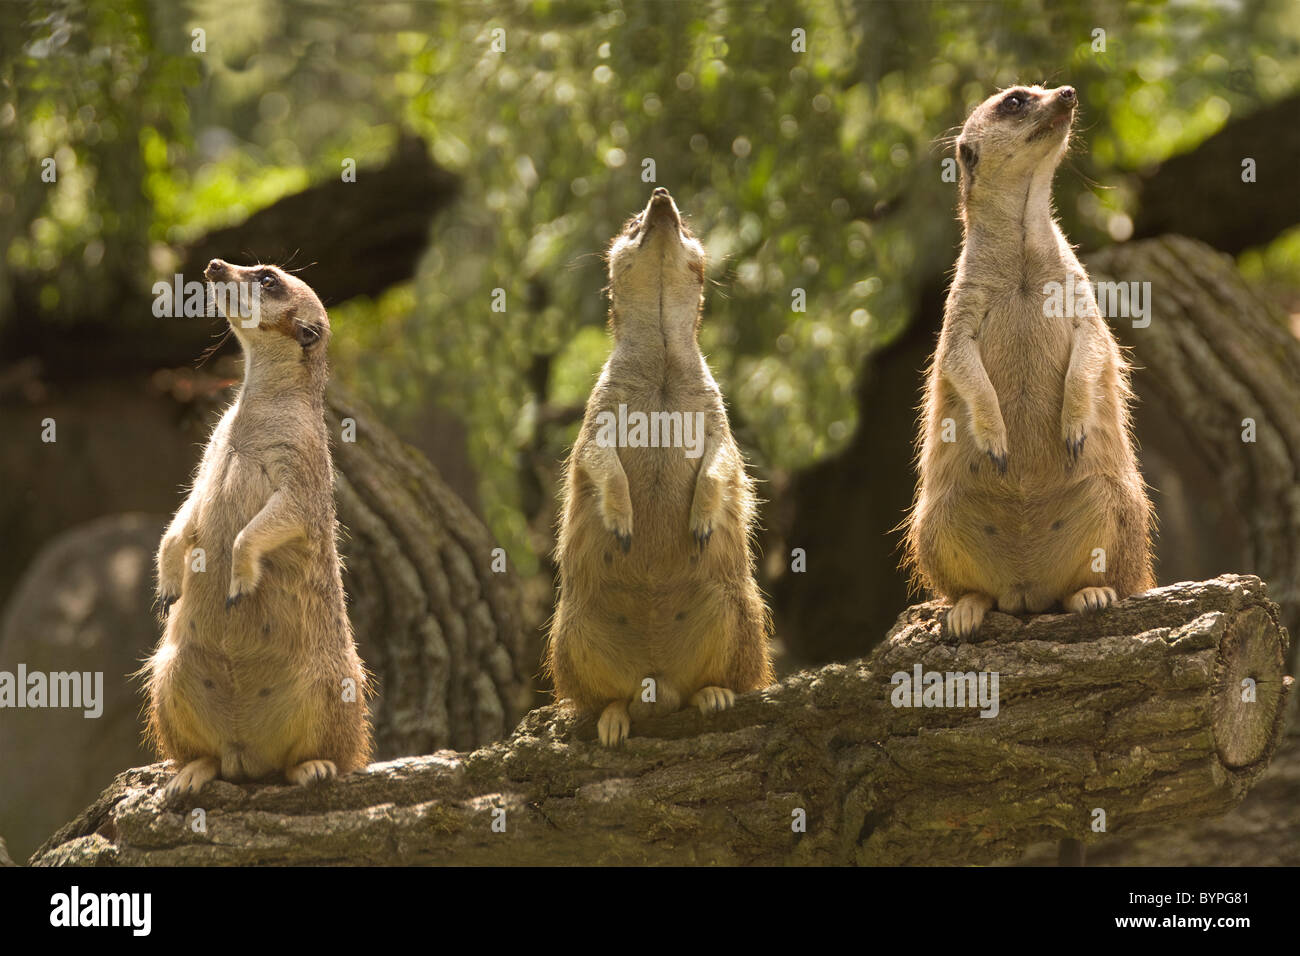 'Home Security System' - meerkats keeping a lookout Stock Photo